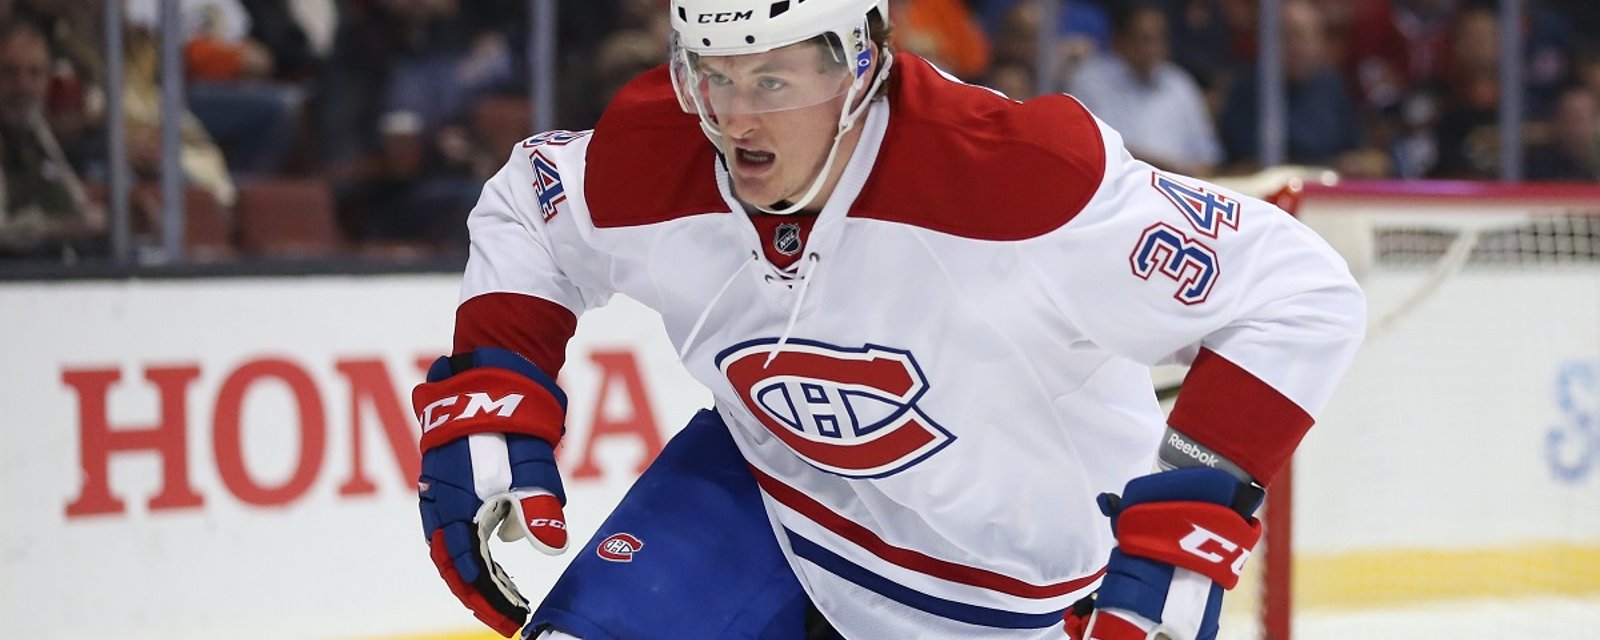 Canadiens reward draft disappointment Michael McCarron with another contract.